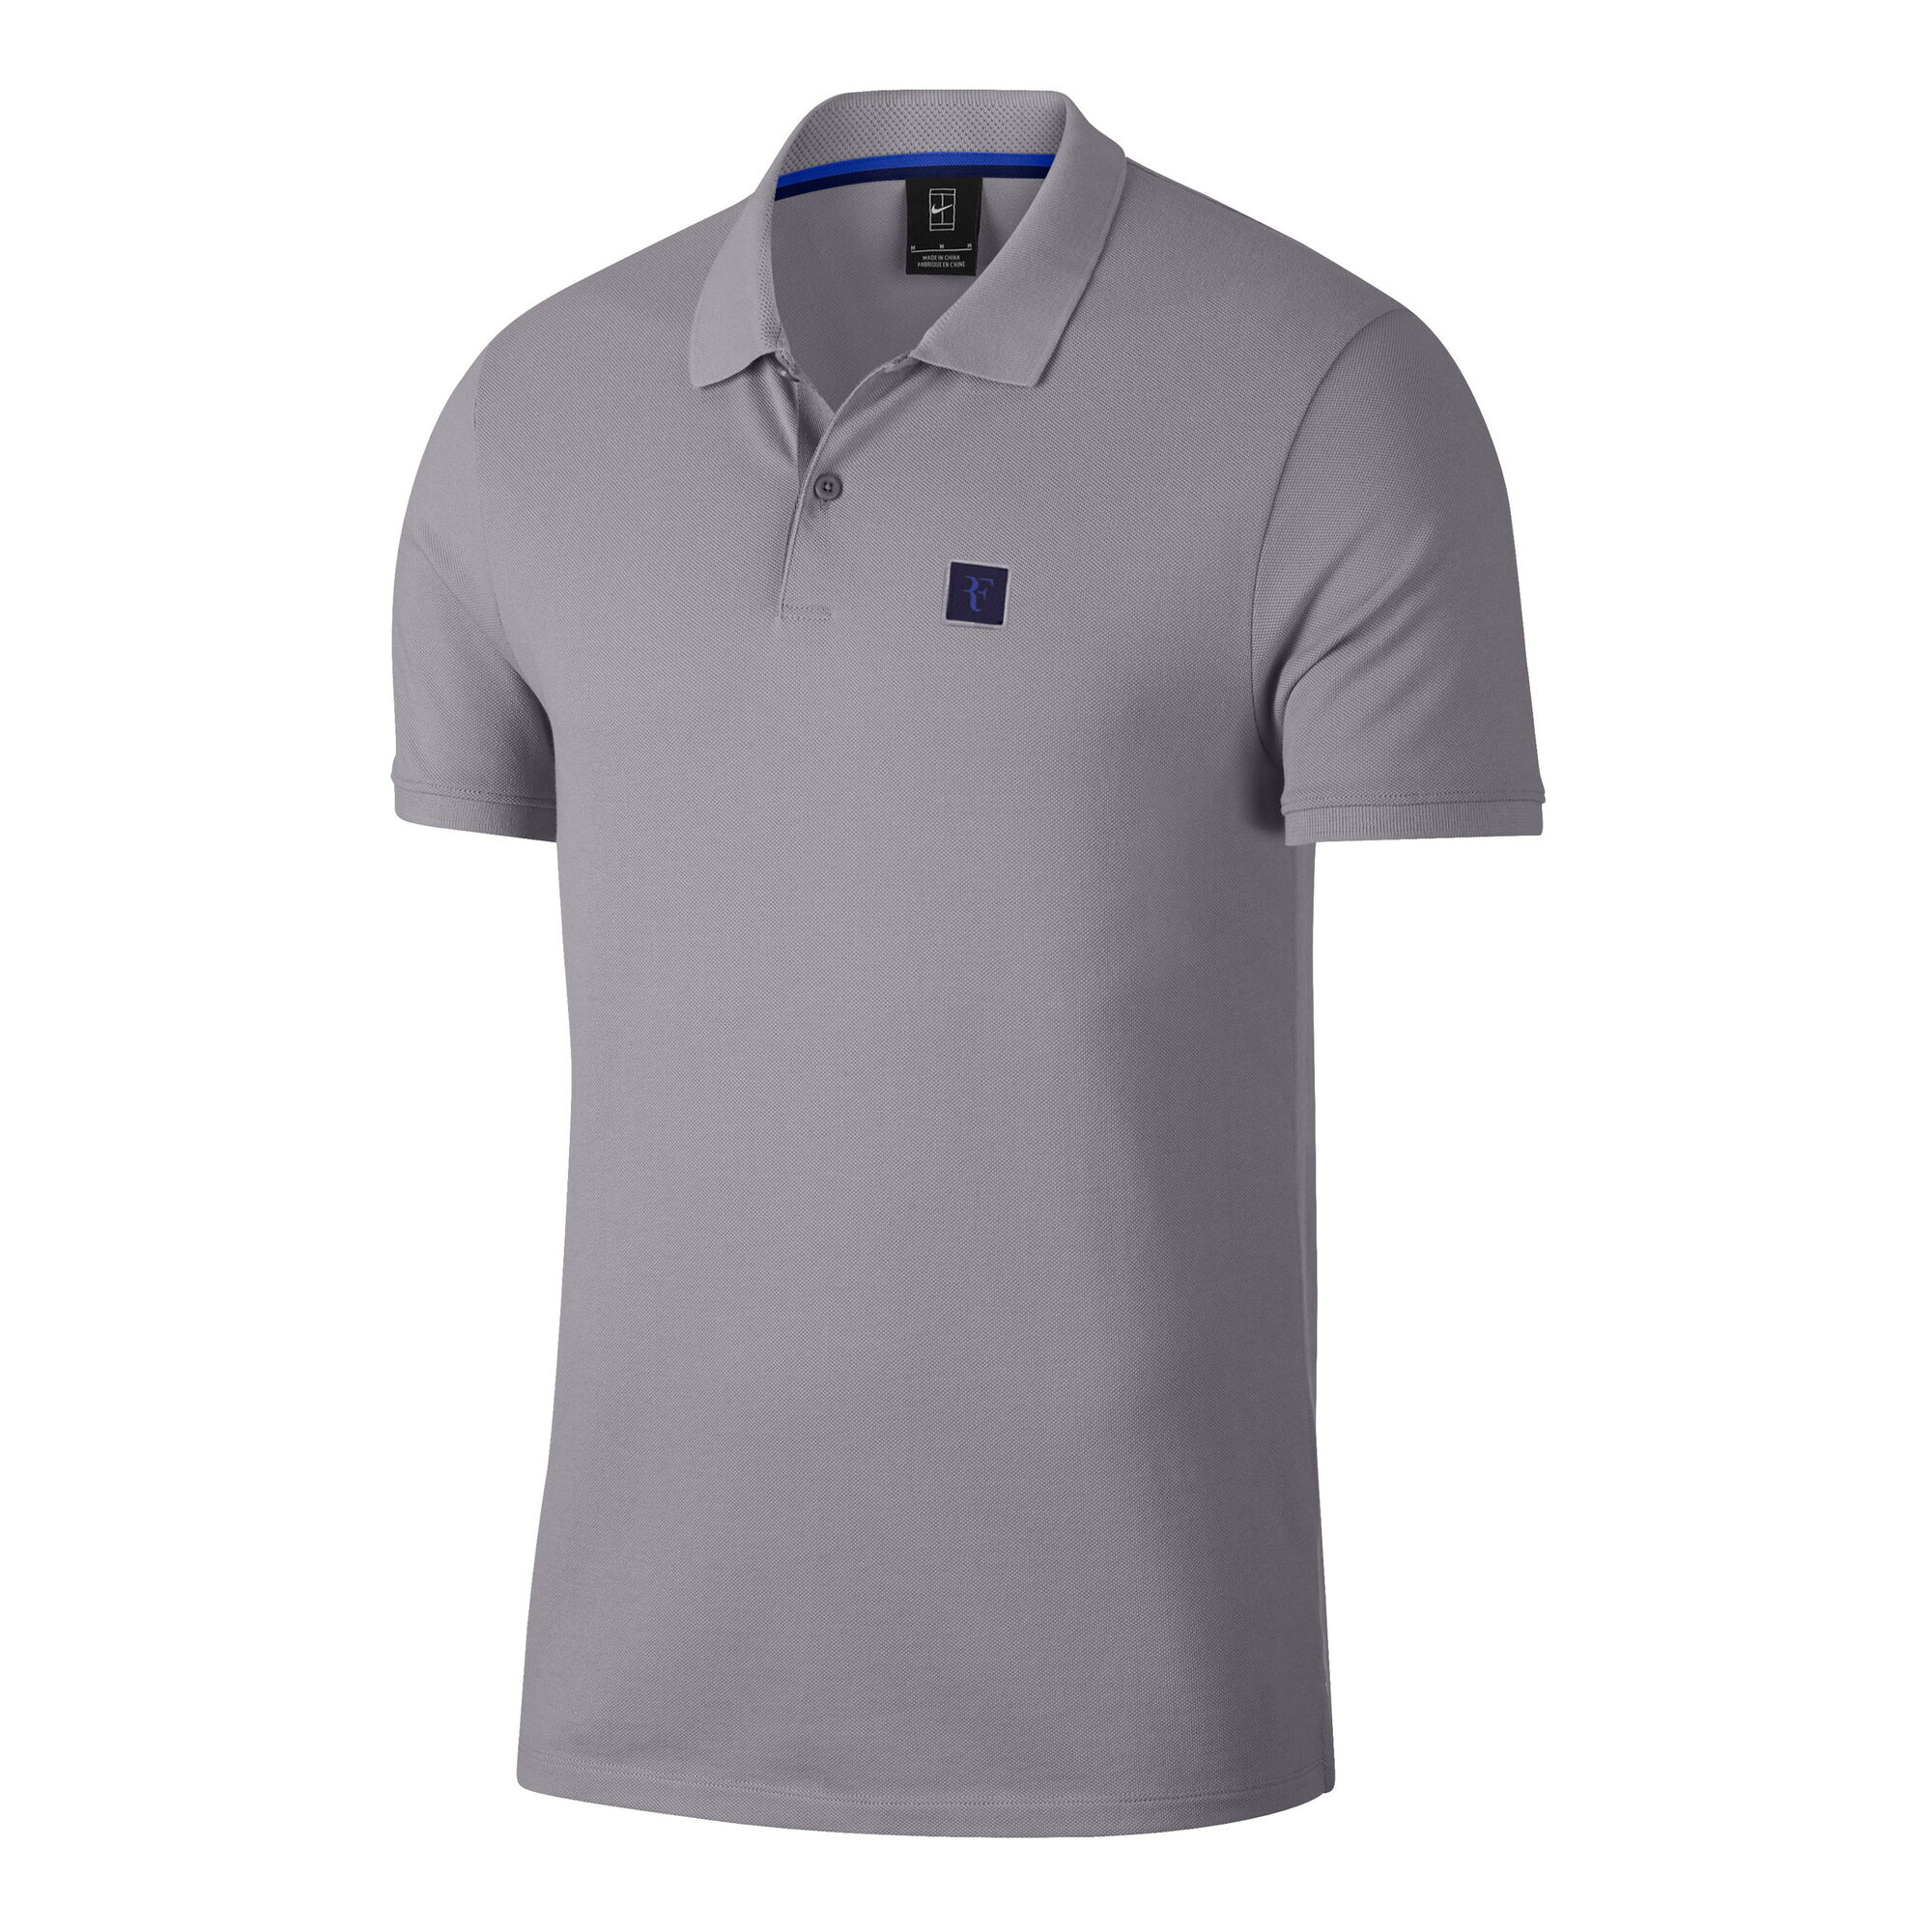 imperdonable borde Perspectiva Nike Roger Federer Court Essential Polo Hombres - Gris Claro, Azul Oscuro  compra online | Tennis-Point